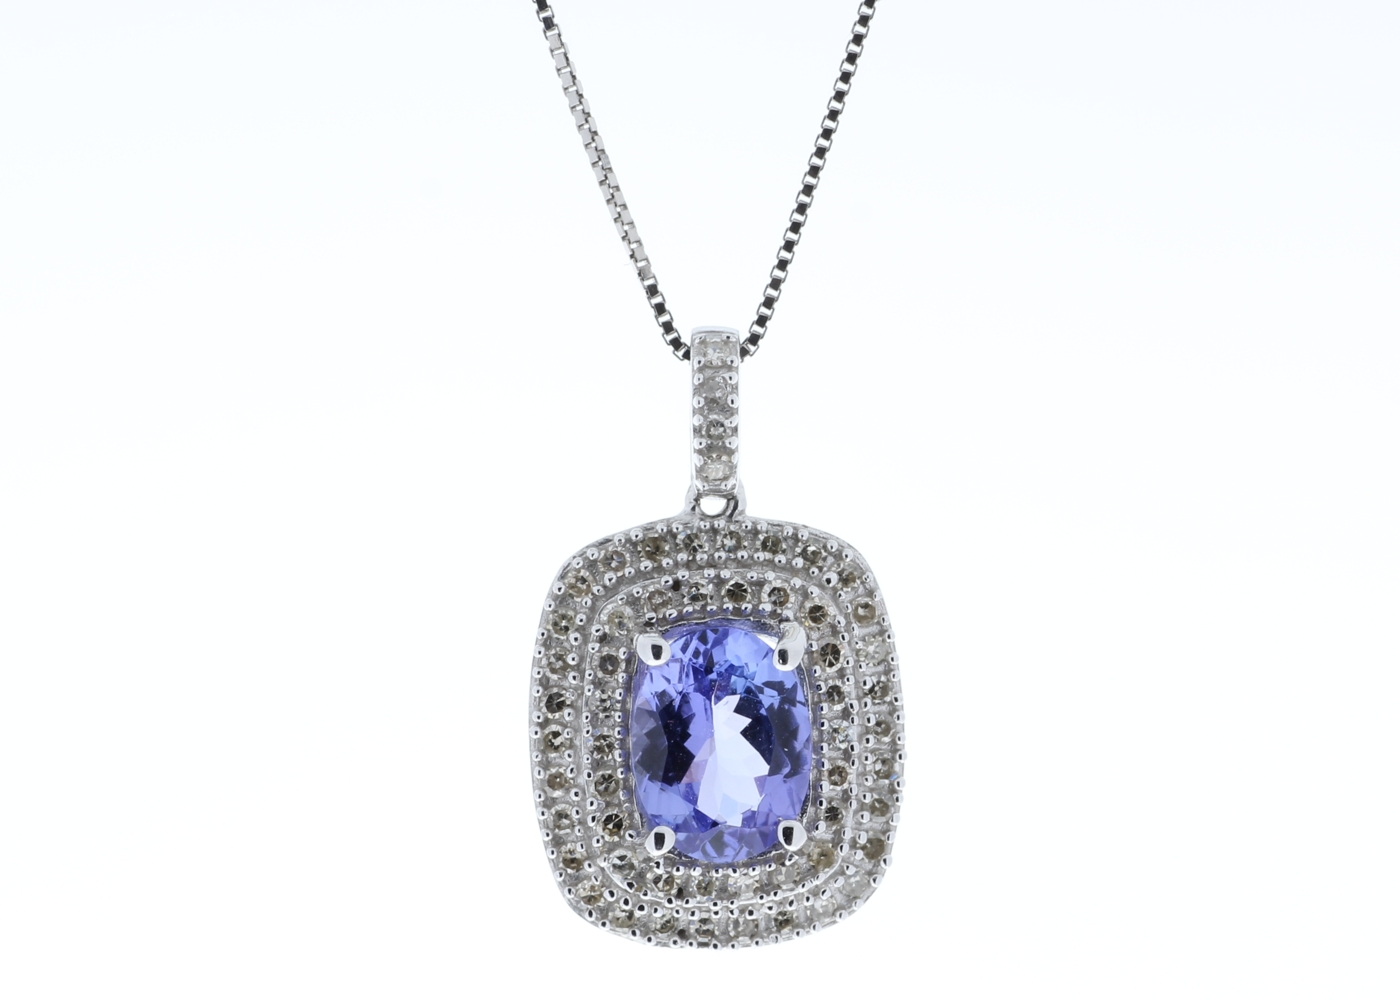 9ct White Gold Oval Tanzanite and Diamond Cluster Pendant 0.28 Carats - Image 2 of 6